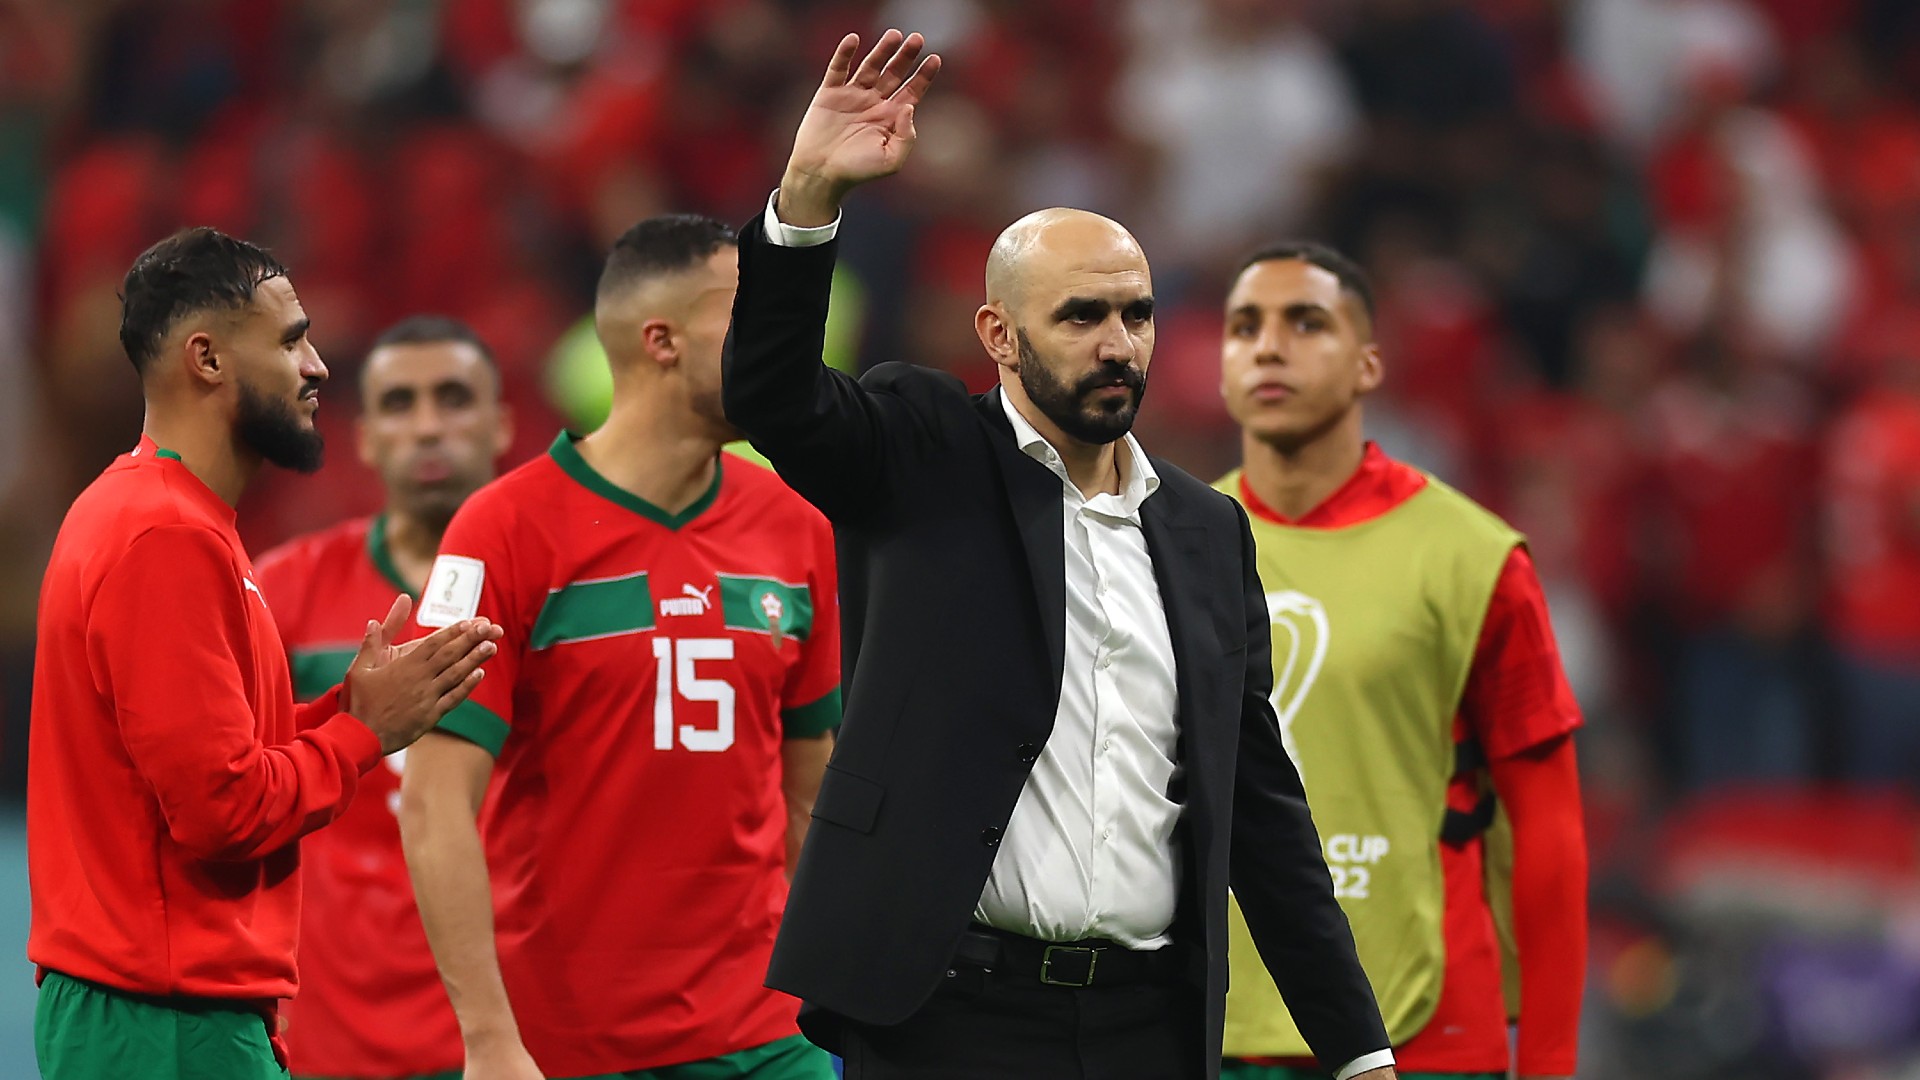 Regragui and Morocco 'made Africa proud'